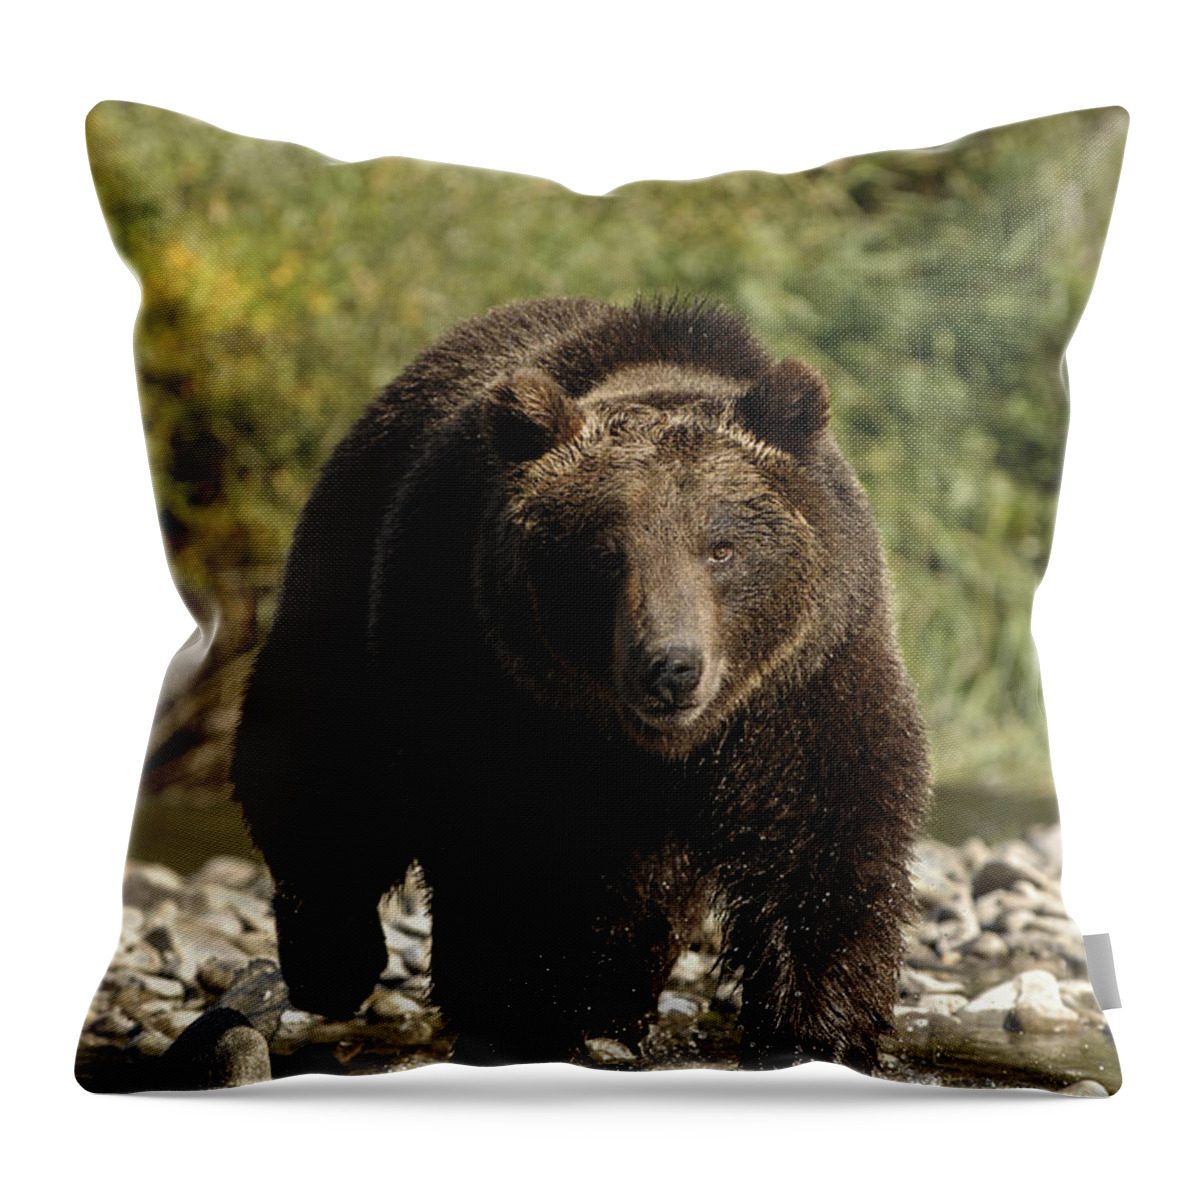 Grizzly Bear Throw Pillow featuring the photograph Grizzly Bear - Streaming by Wildlife Fine Art